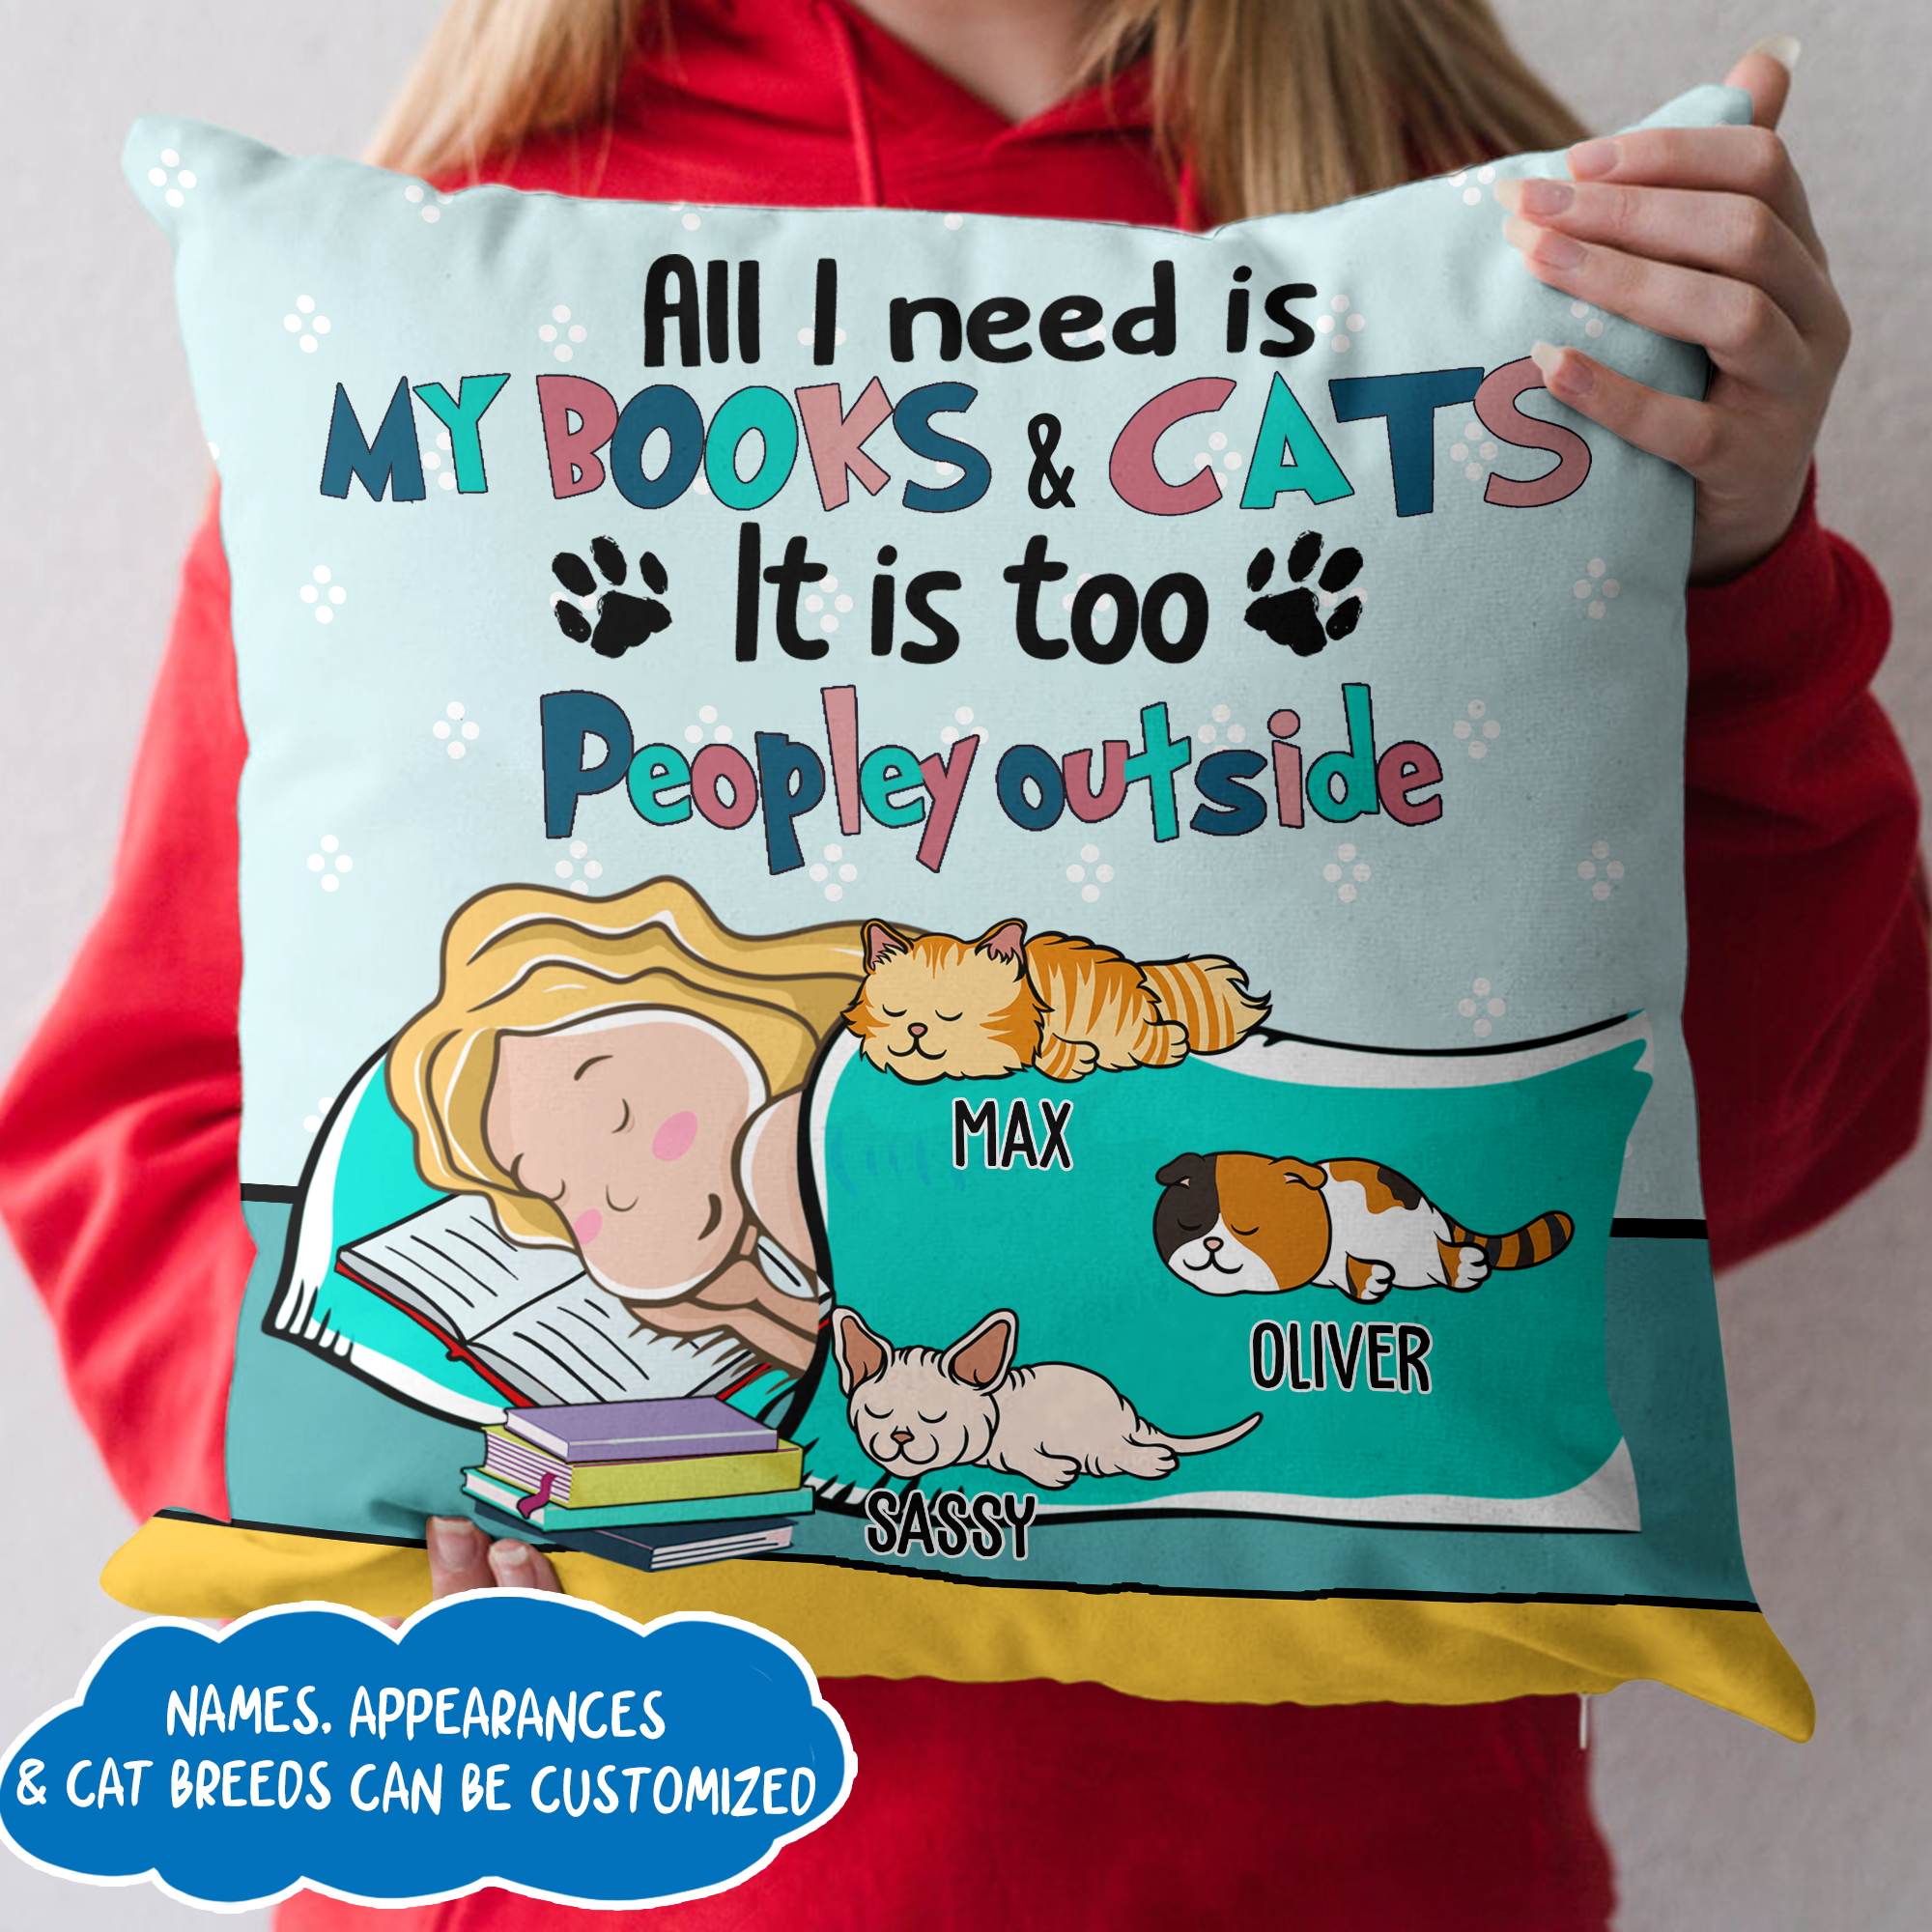 Personalized Pillow Case - Gift For Book & Cat Lovers - All I Need Is My Books & Cats